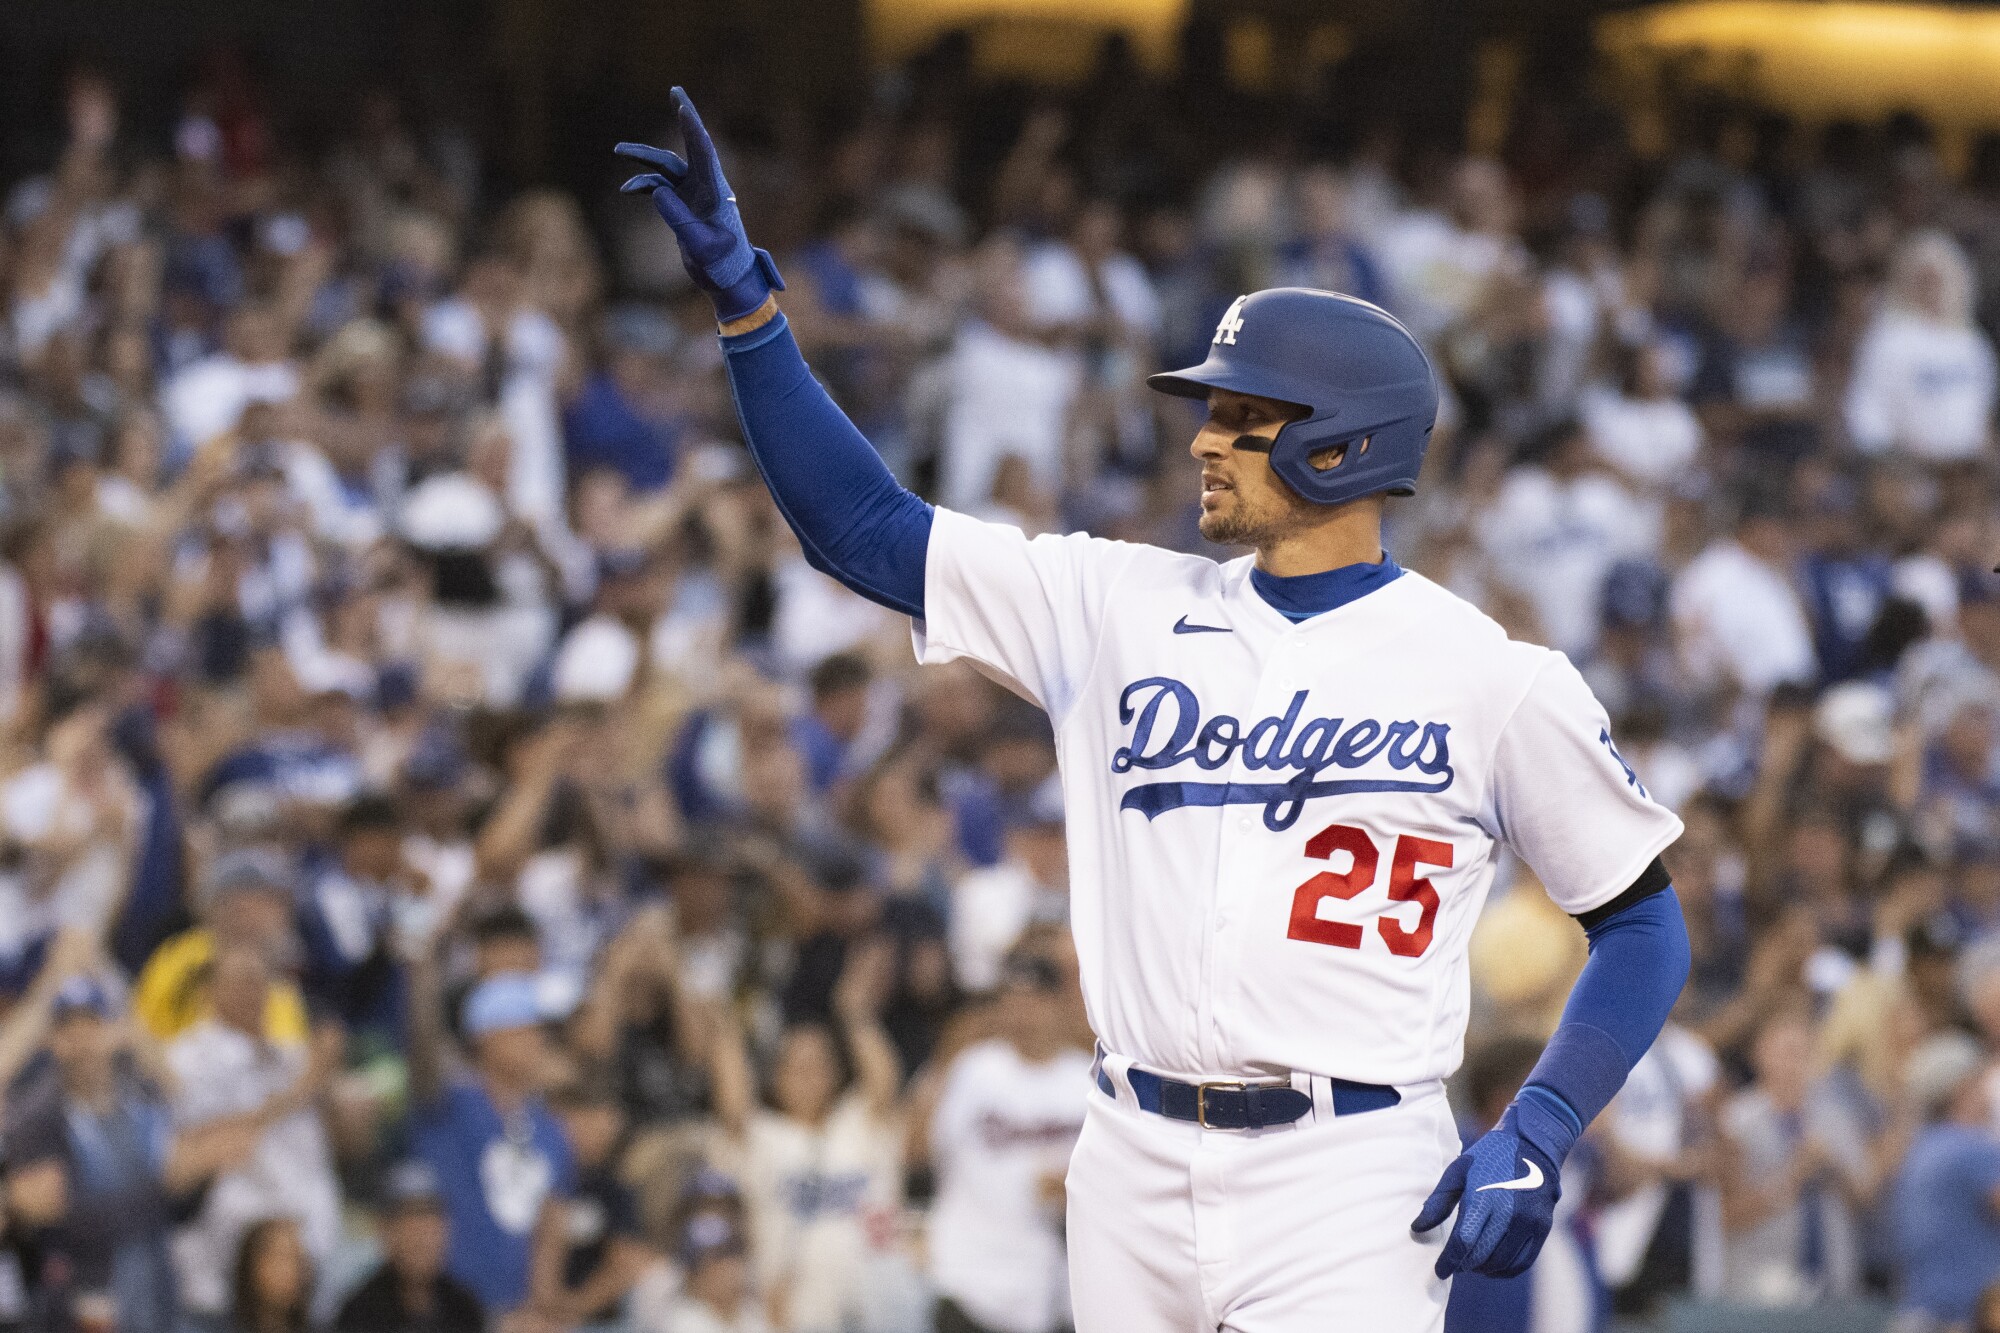 Dodgers' Trayce Thompson gestures toward the stands after scoring three runs